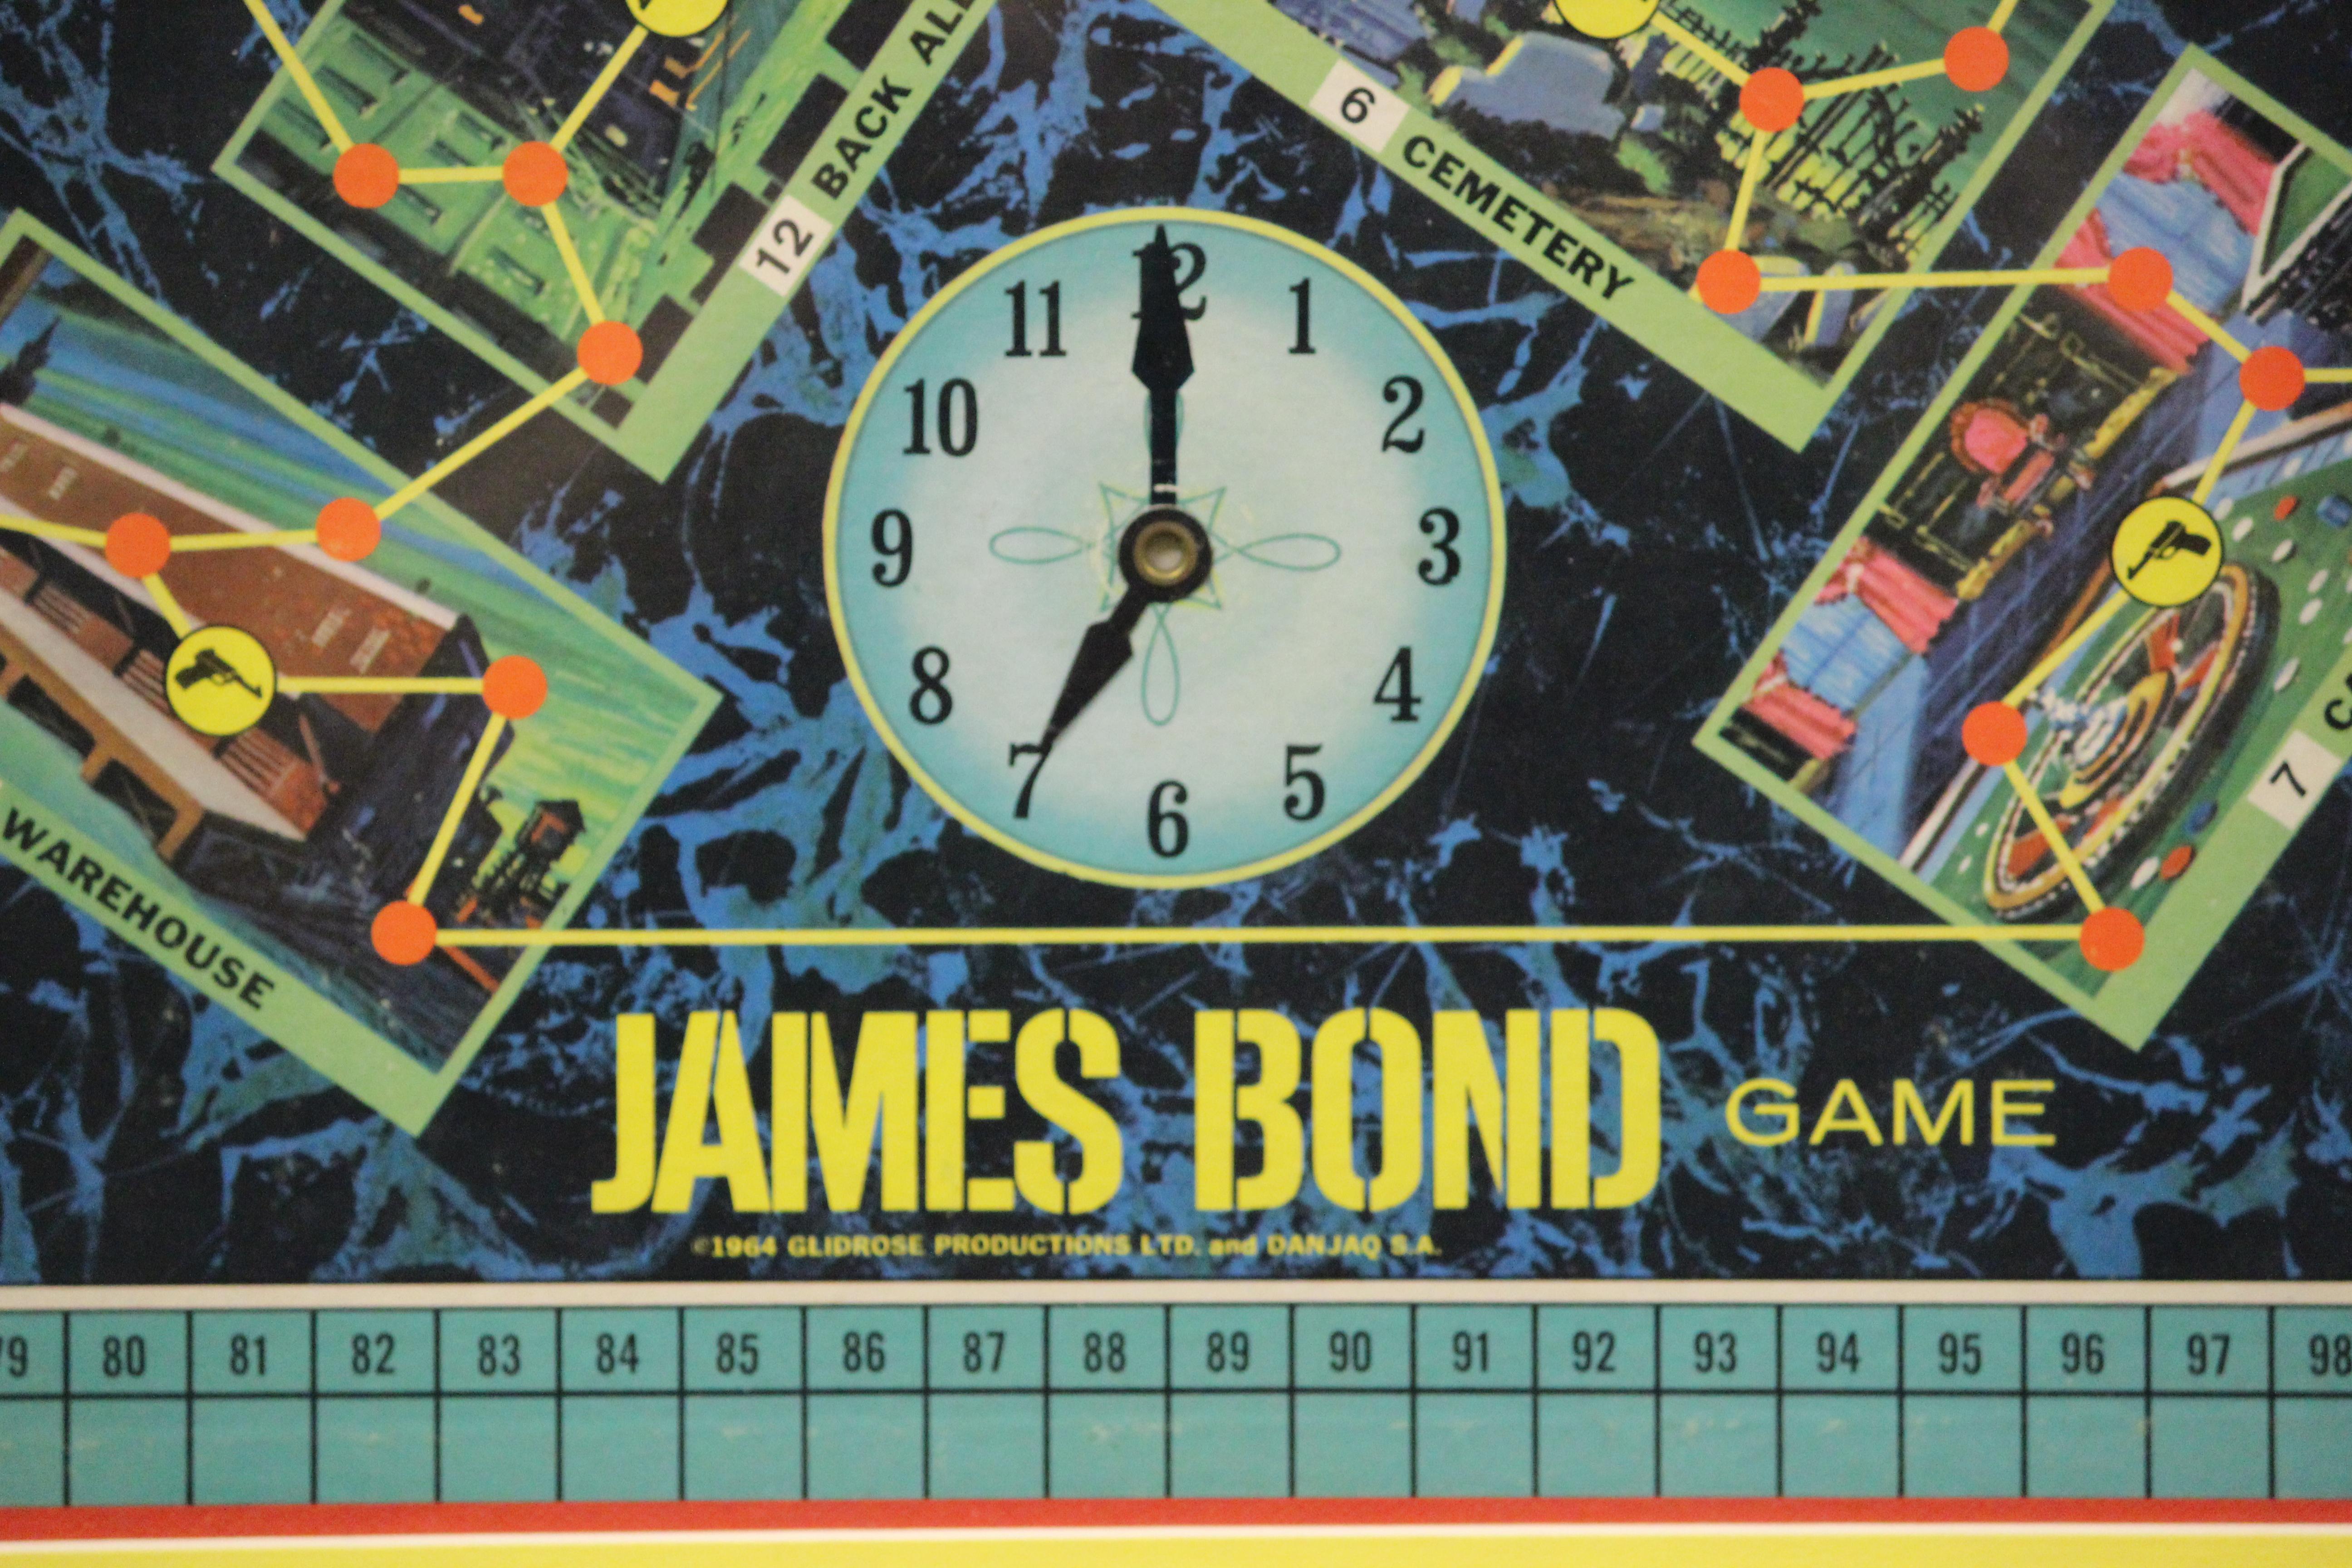 Classic James Bond 007 c1964 (framed) board game w/ great colour graphics

Board Sz: 18 1/8